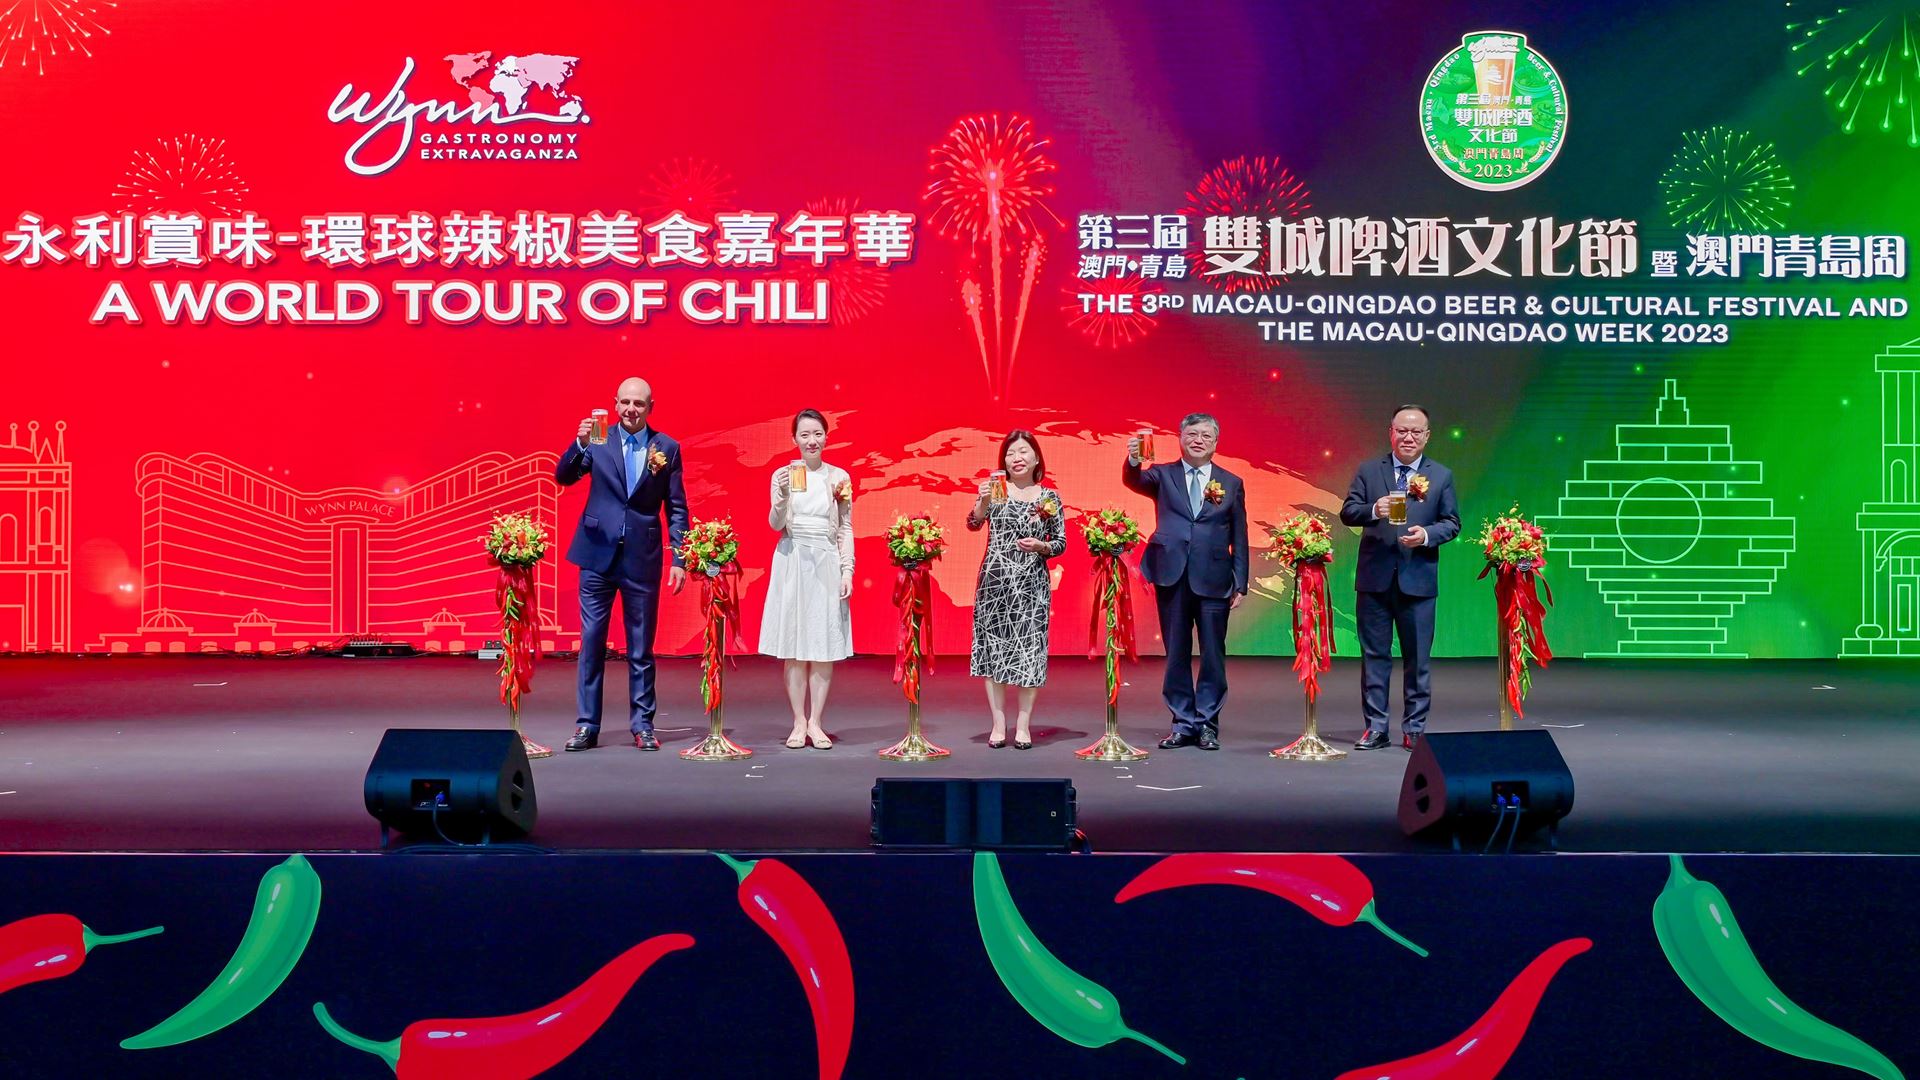 Officiating guests attend the opening ceremony of "Wynn Gastronomy Extravaganza – A World Tour of Chili" and